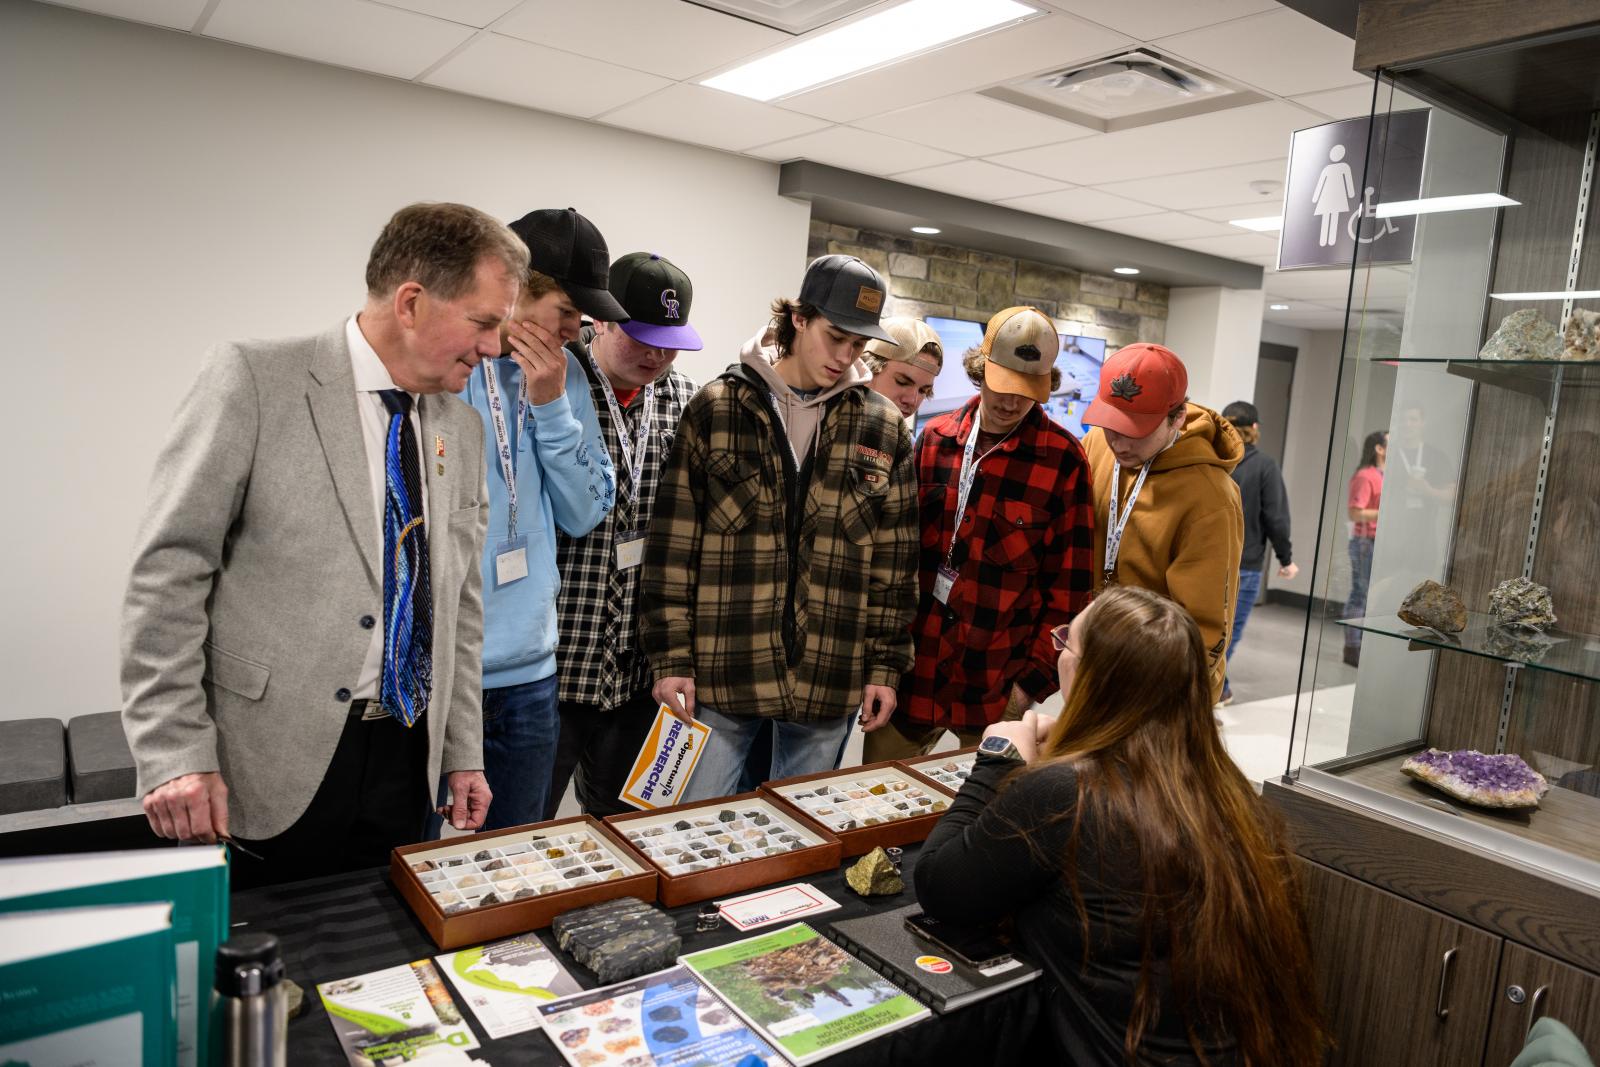 George Pirie, Minister of Mines and the MPP for Timmins joins students as they check out a rock and mineral display.